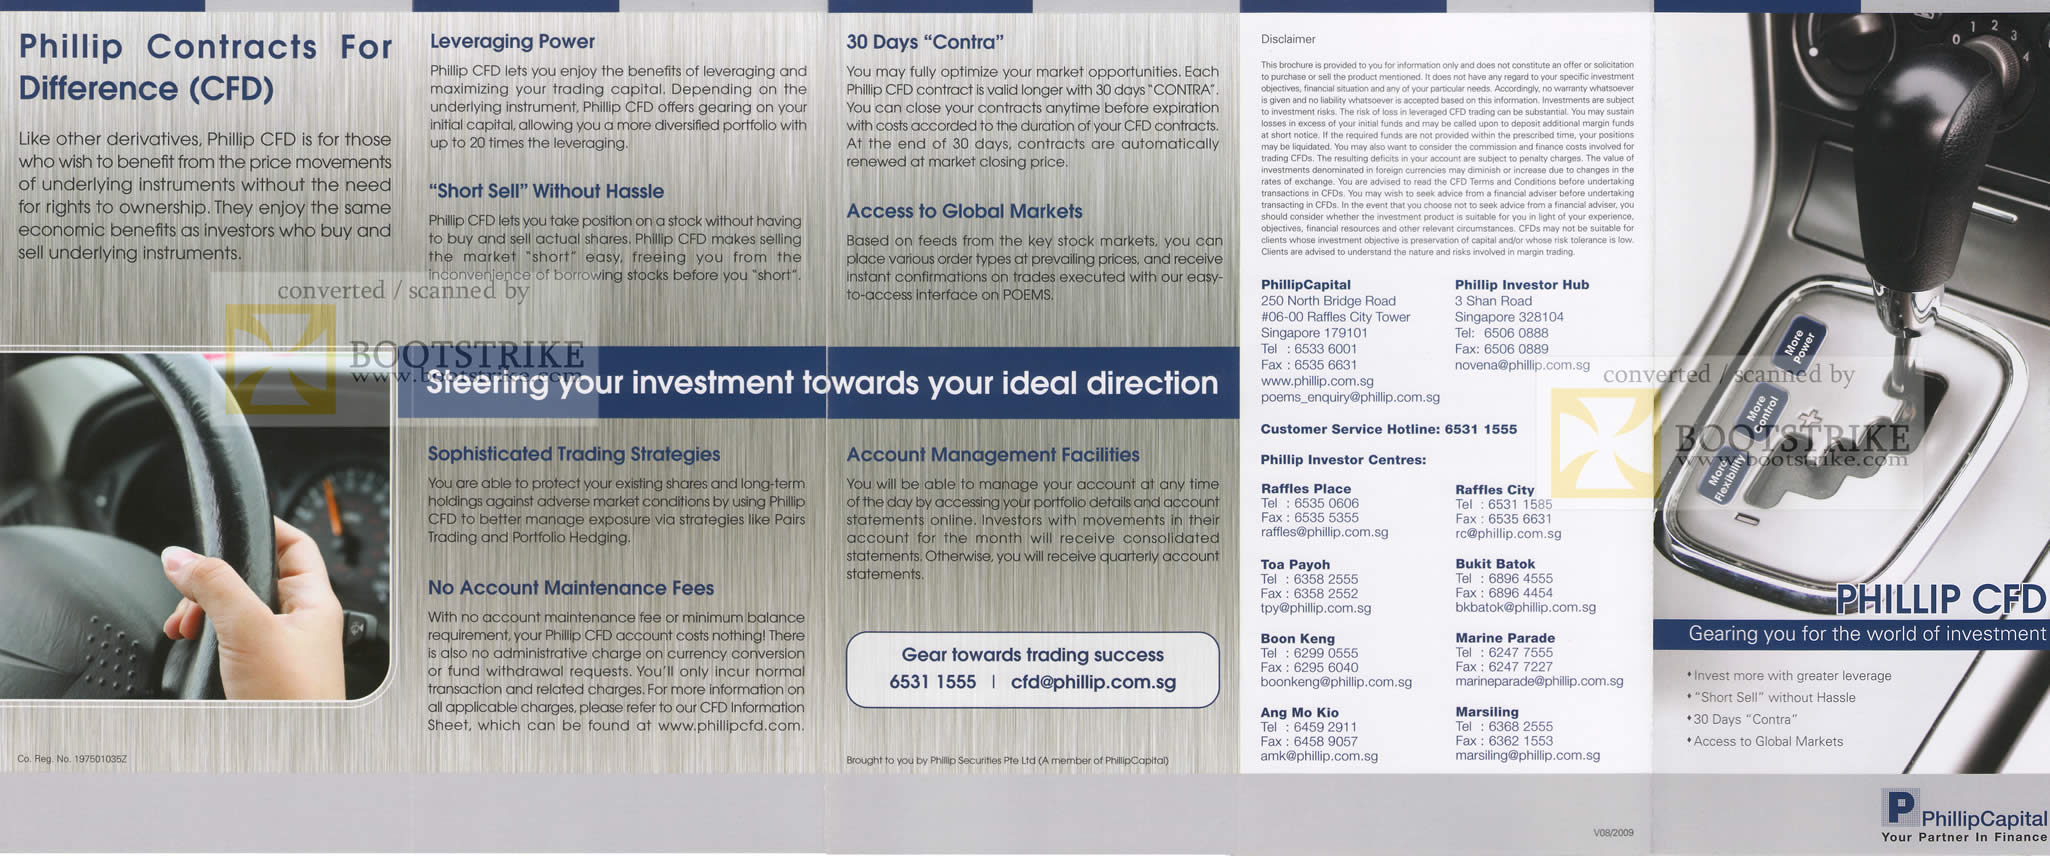 Sitex 2009 price list image brochure of Phillip CFD Contracts For Difference